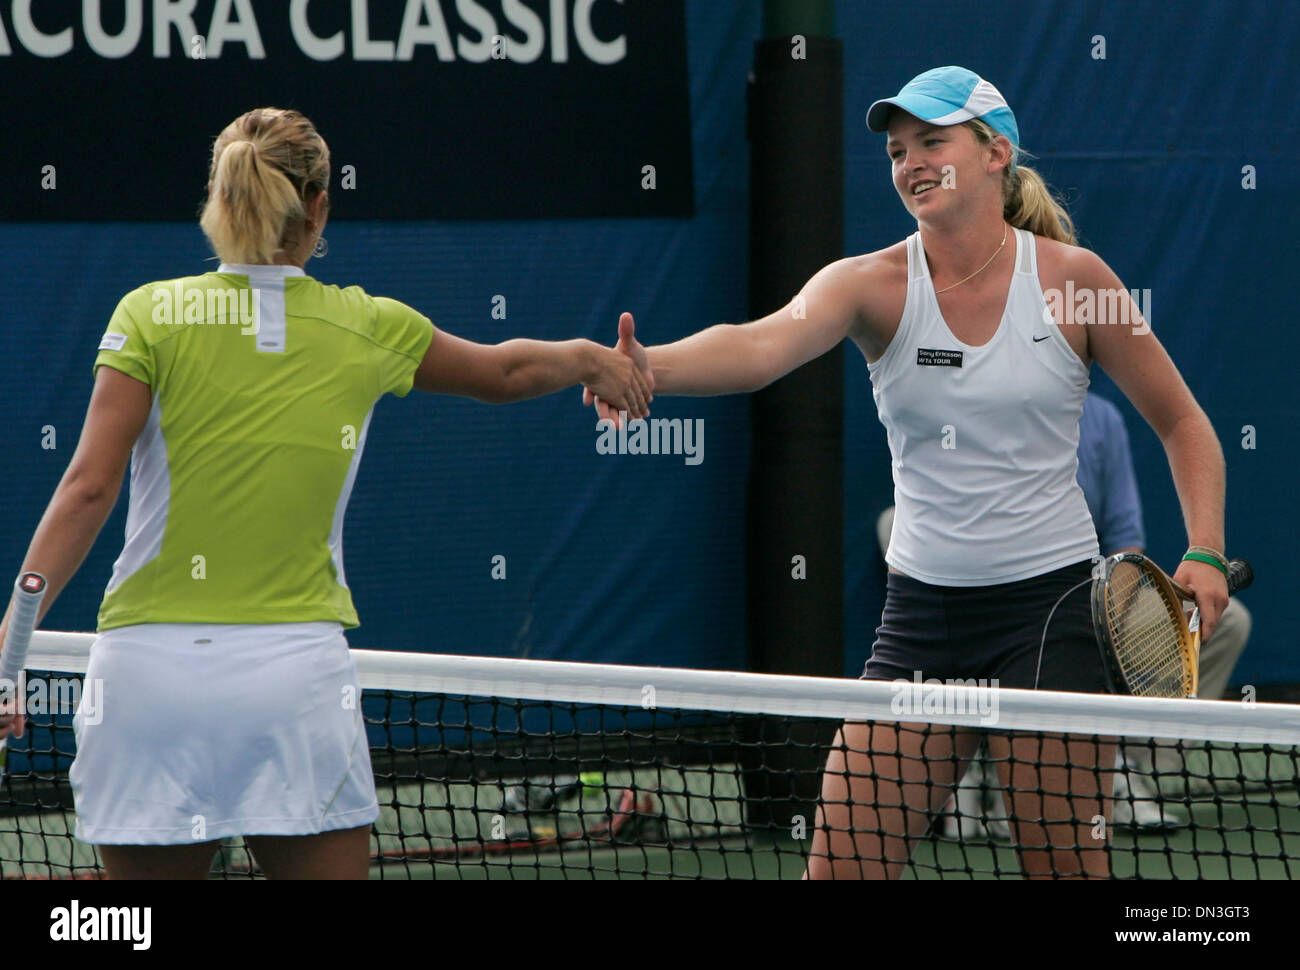 Jul 31, 2006; Carlsbad, CA, USA; COCO VANDEWEGHE, at right, shakes hands with KATERYNA BONDARENKO after losing to her. Mandatory Credit: Photo by Charlie Neuman/SDU-T/ZUMA Press. (©) Copyright 2006 by SDU-T Stock Photo